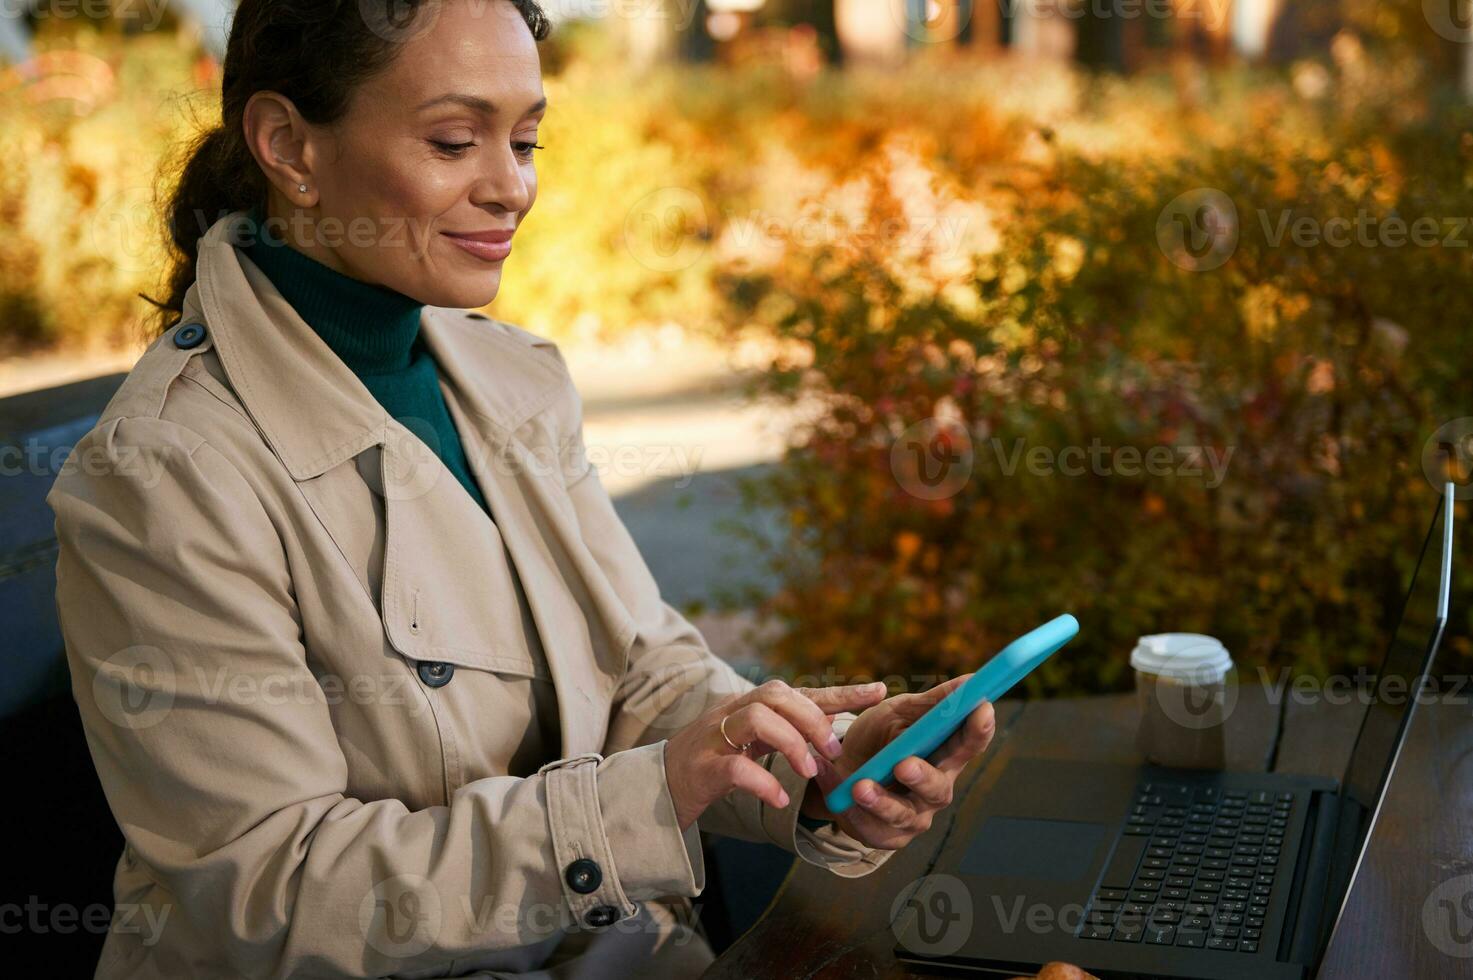 Confident dark-haired beautiful woman cutely smiles, uses mobile phone while working distantly on an oak grove wooden cafe in a beautiful autumn warm sunny day. Autumn background and business concept photo